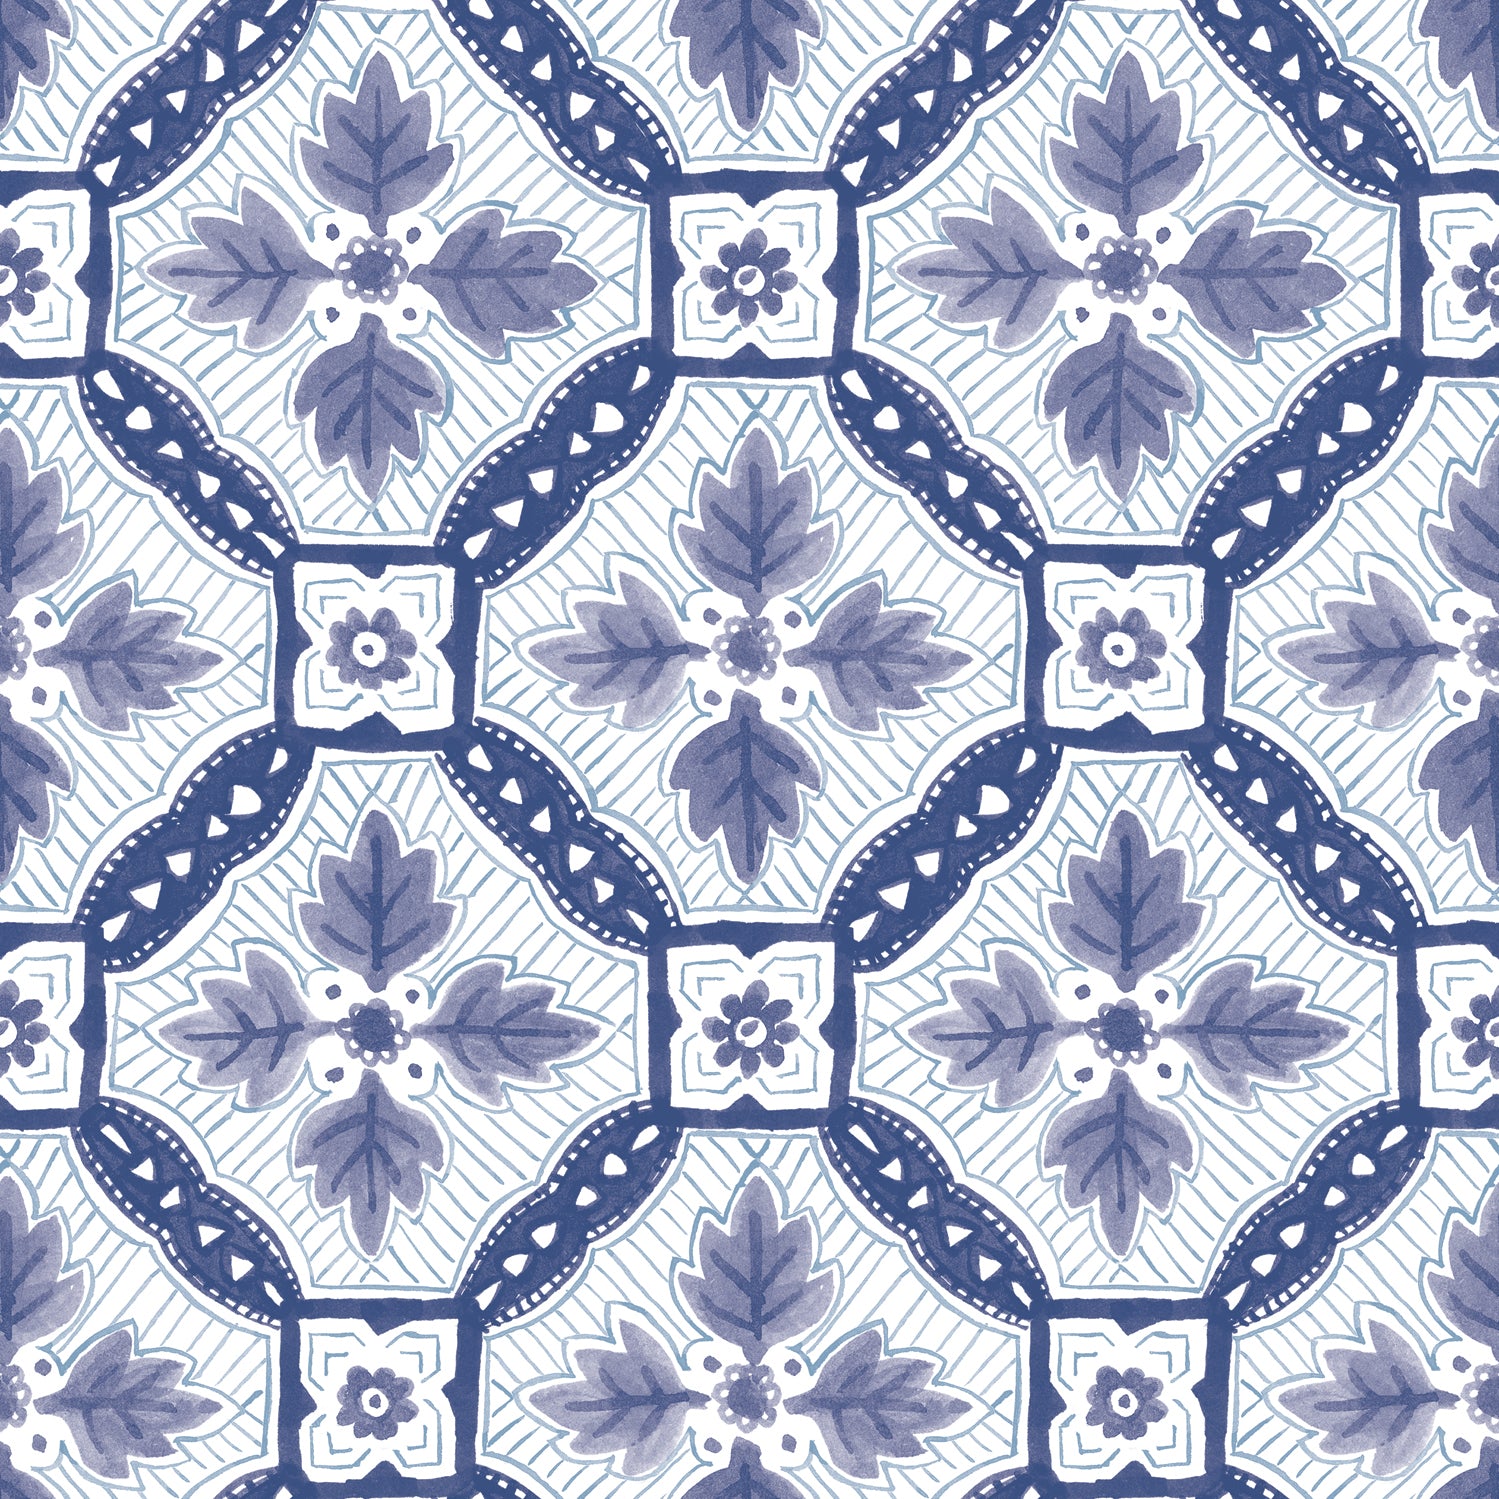 Detail of wallpaper in a painterly botanical grid in shades of navy and purple on a white field.